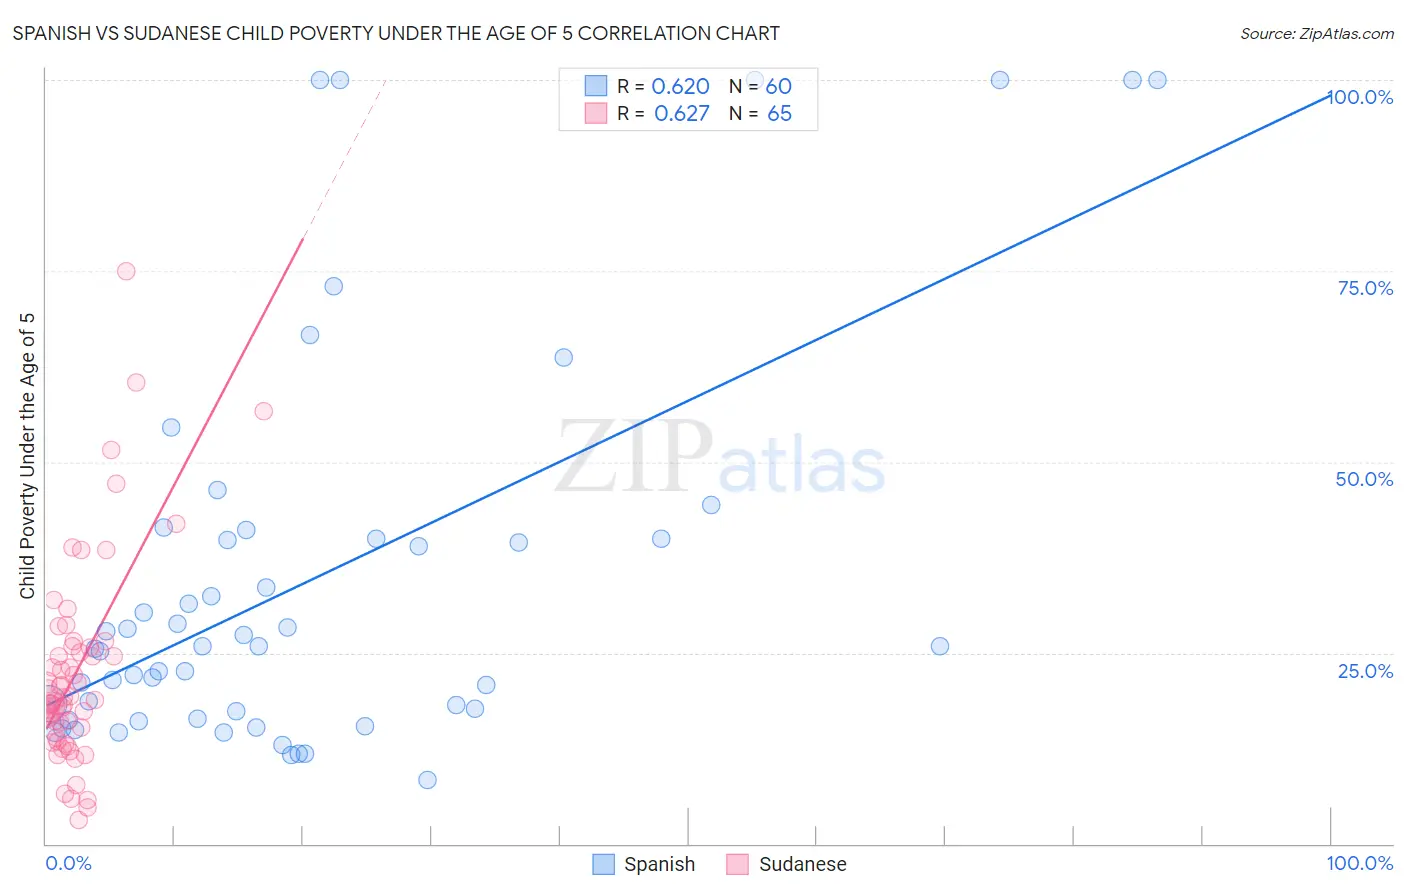 Spanish vs Sudanese Child Poverty Under the Age of 5